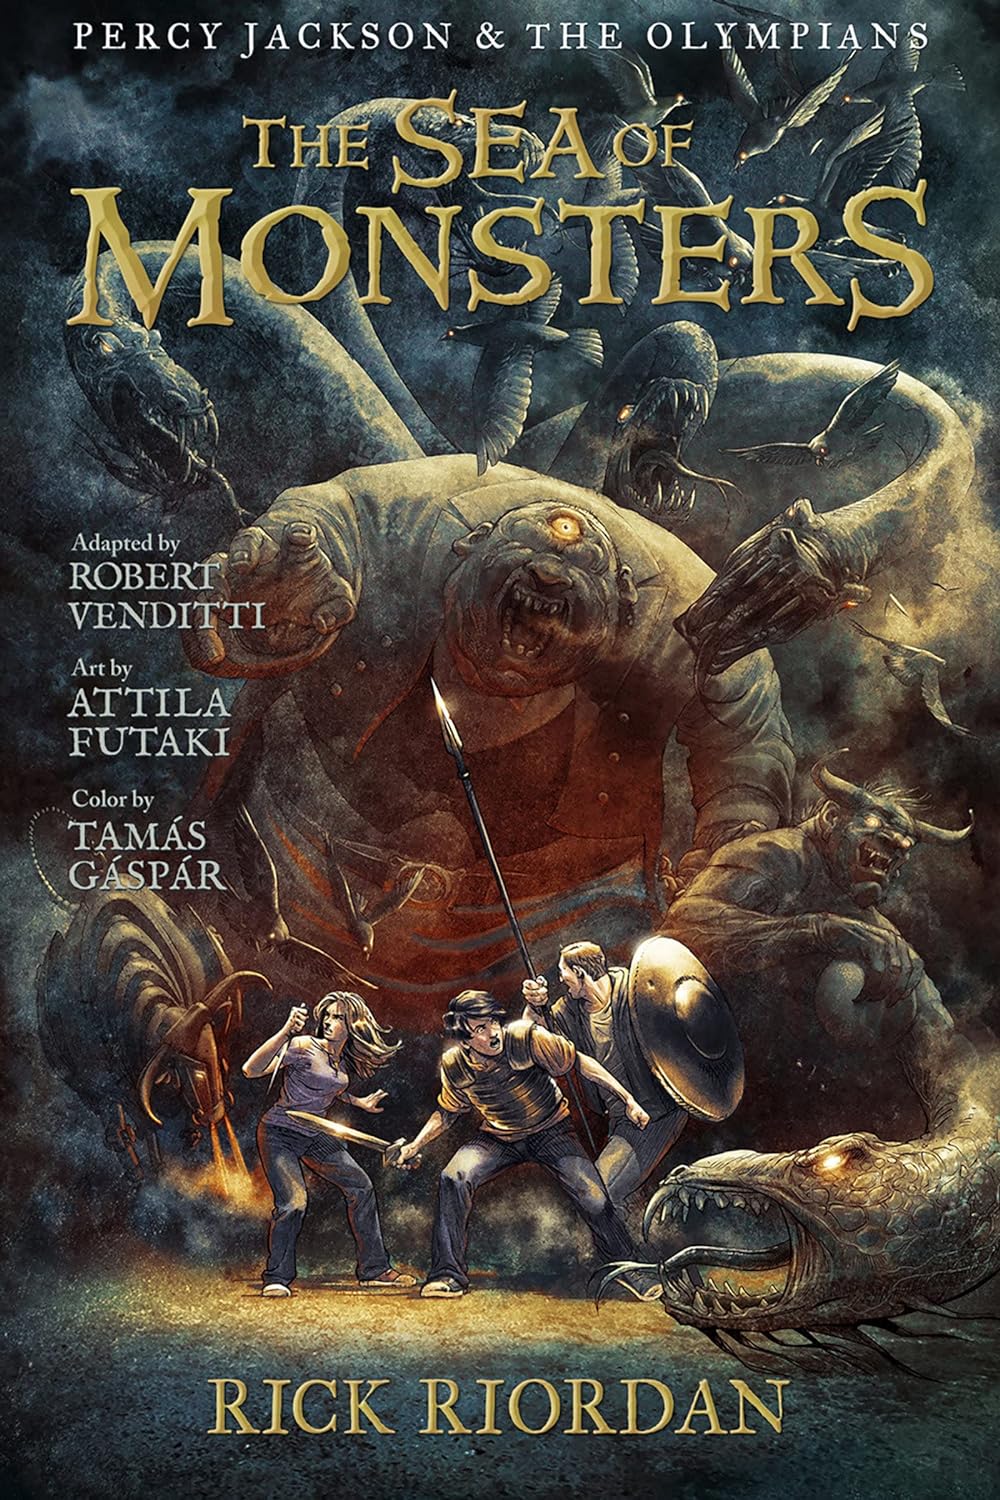 Monster on front of book chasing main character